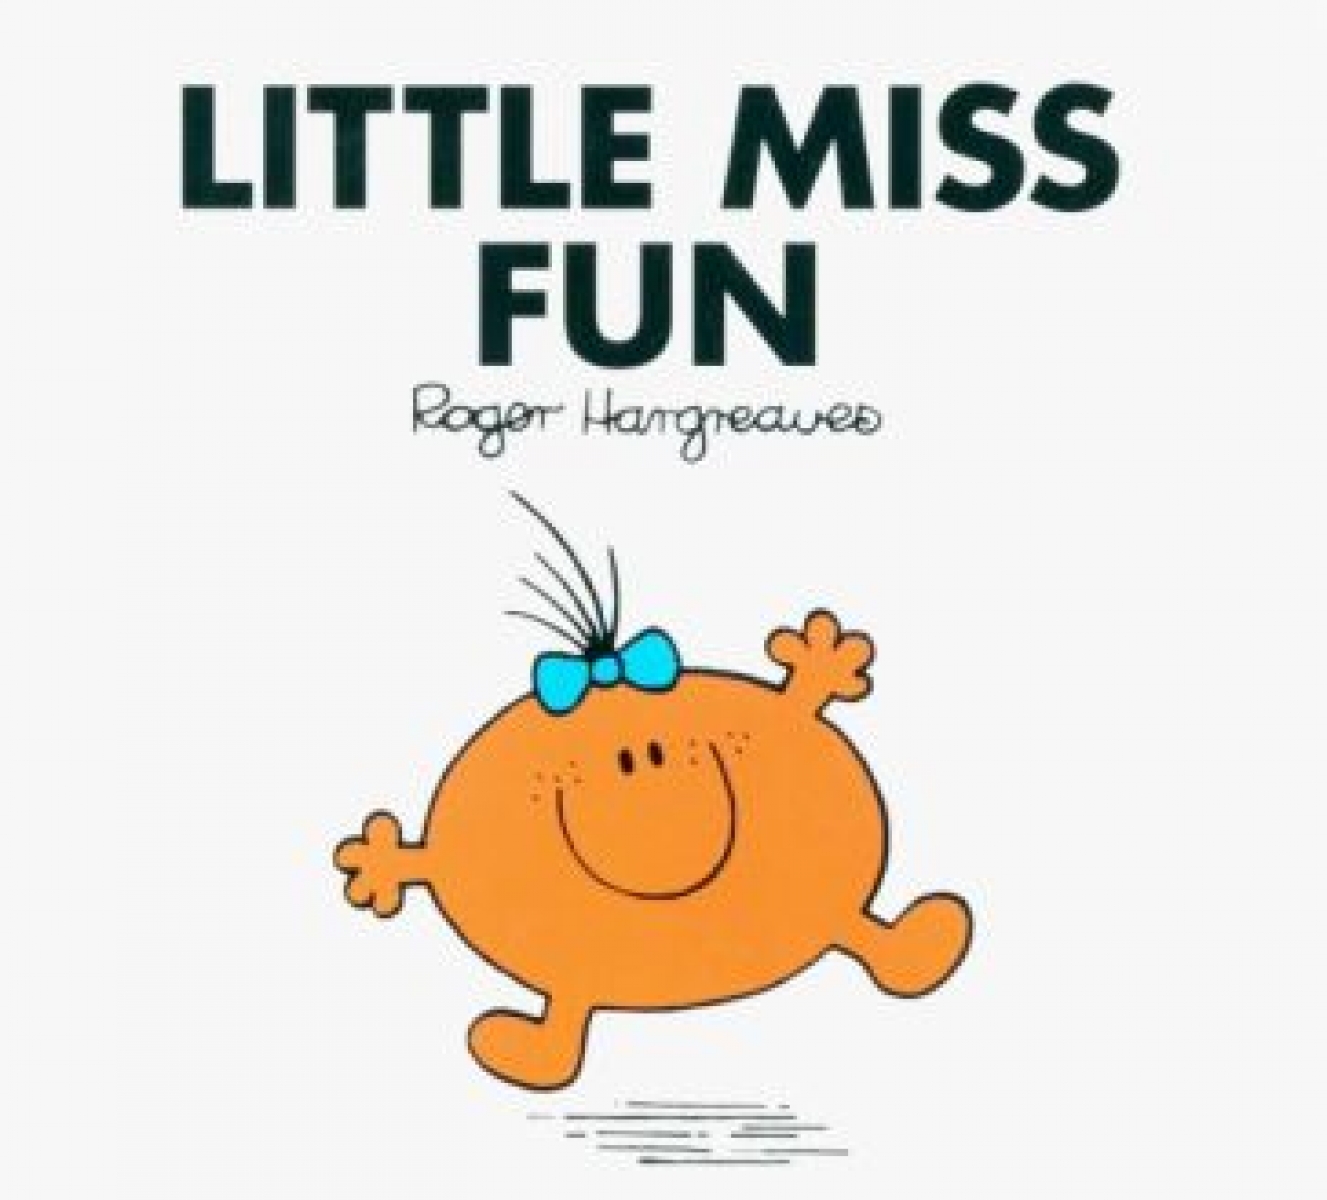 Hargreaves Roger Little Miss Fun 